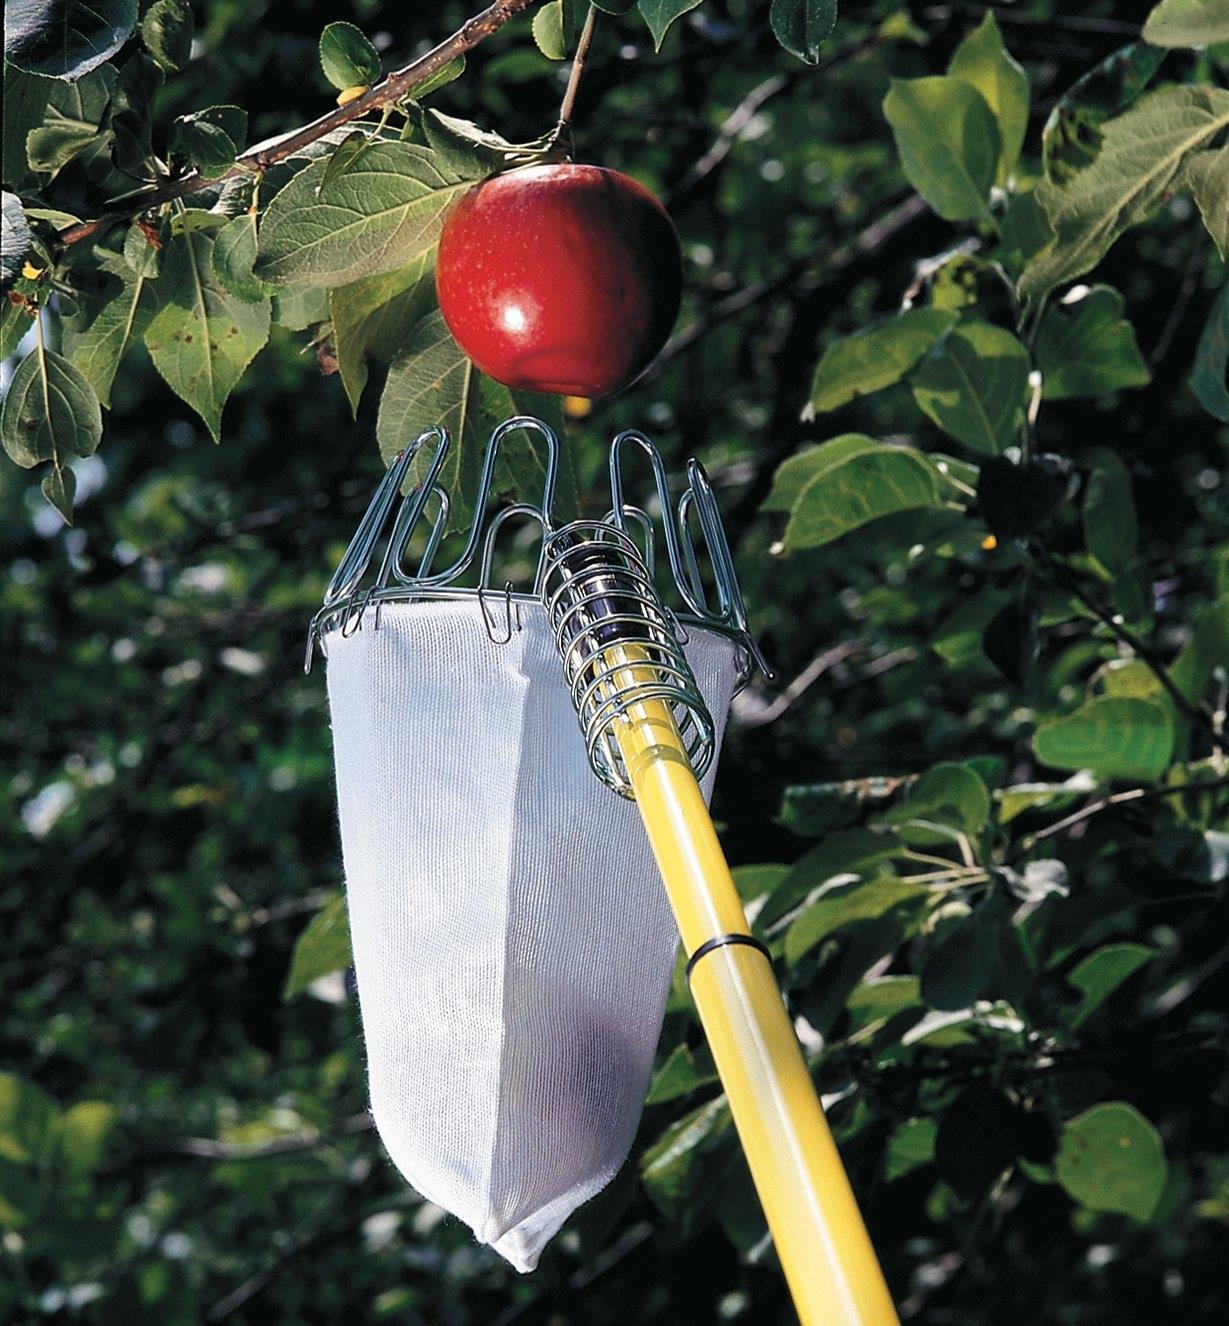 Fruit Picker attached to a pole, being held below an apple on a branch